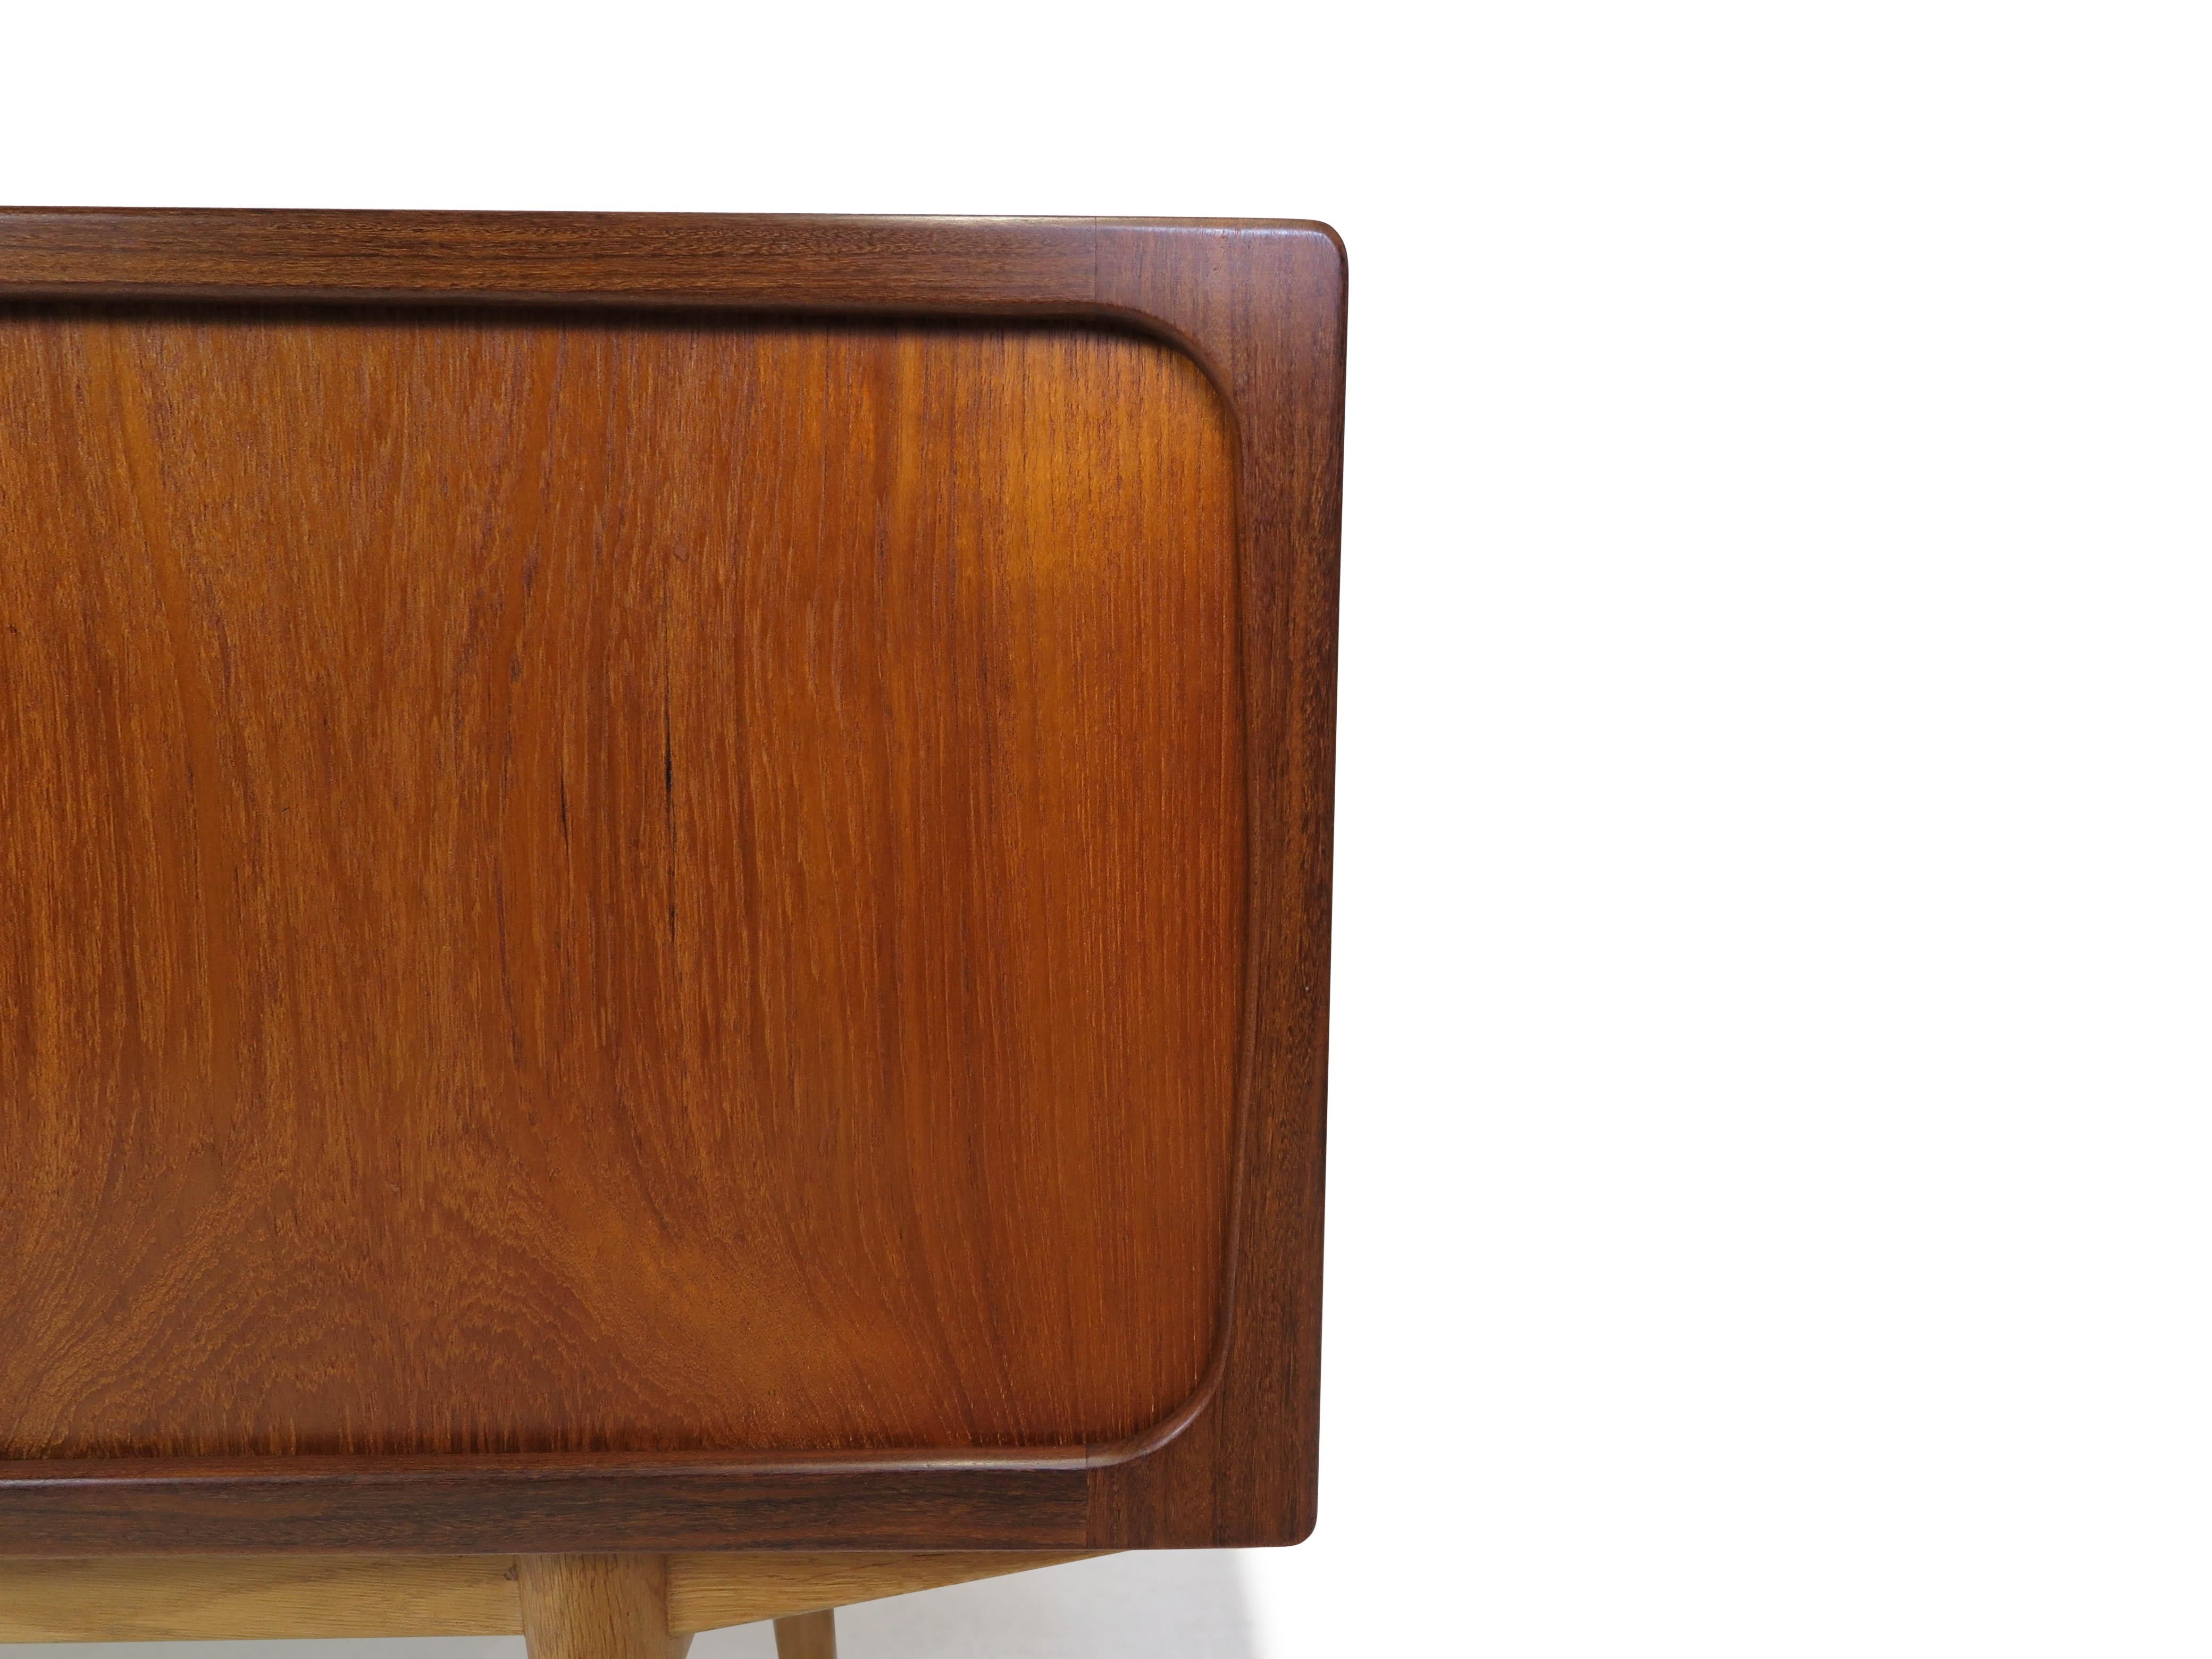 Danish Teak Credenza with Center Mirrored Bar In Excellent Condition For Sale In Oakland, CA